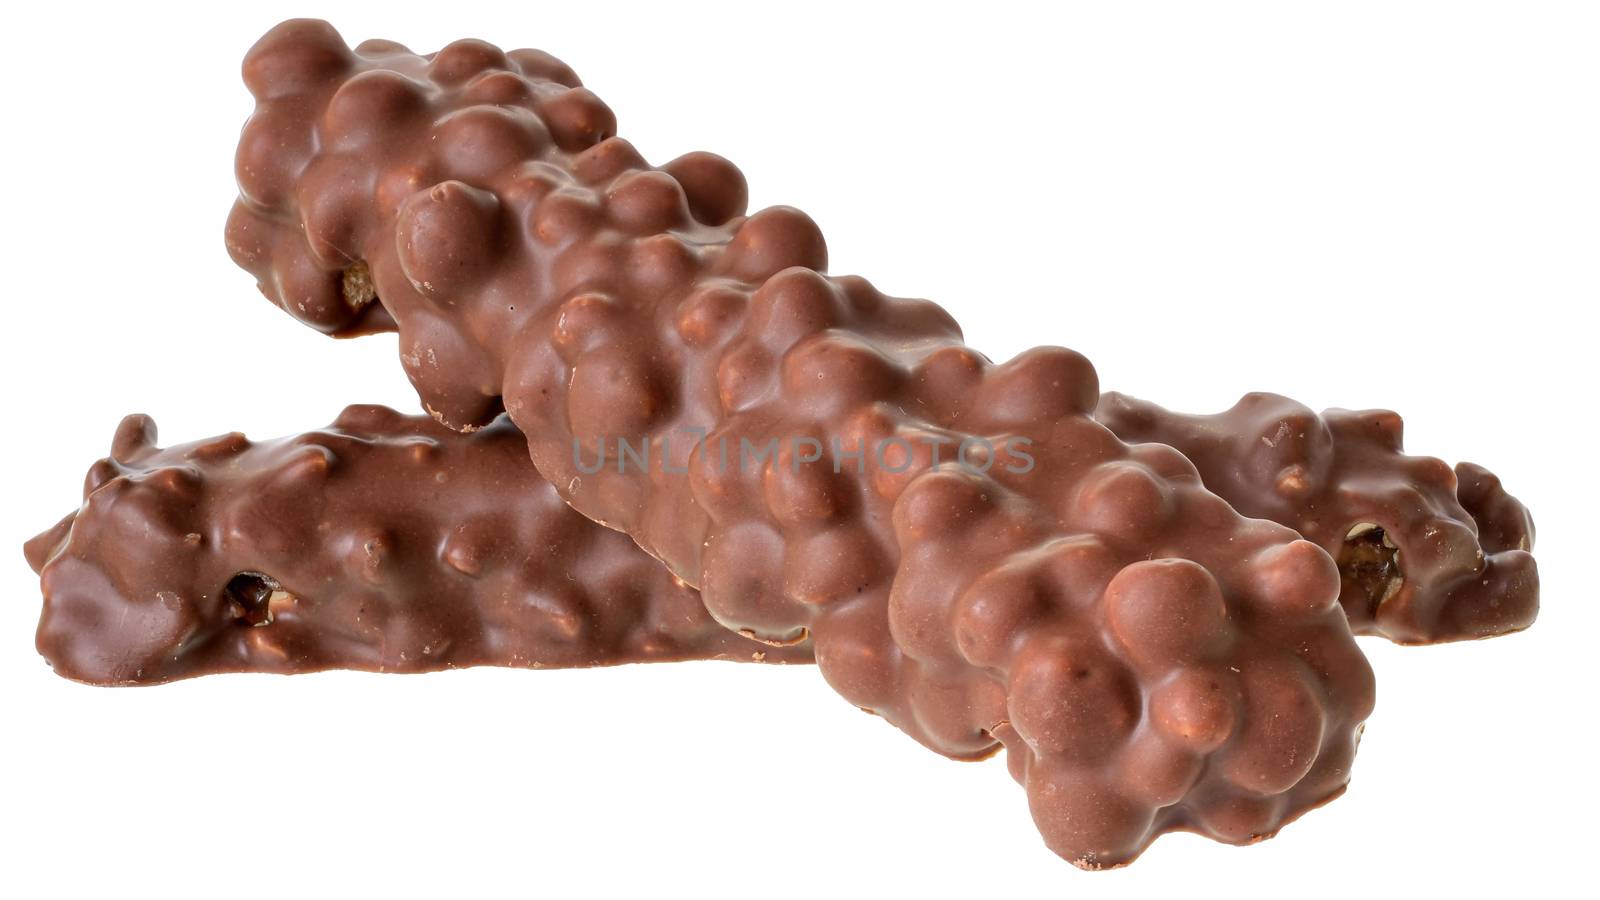  Chocolate bar with peanut, caramel and puffed rice isolated on a white background.